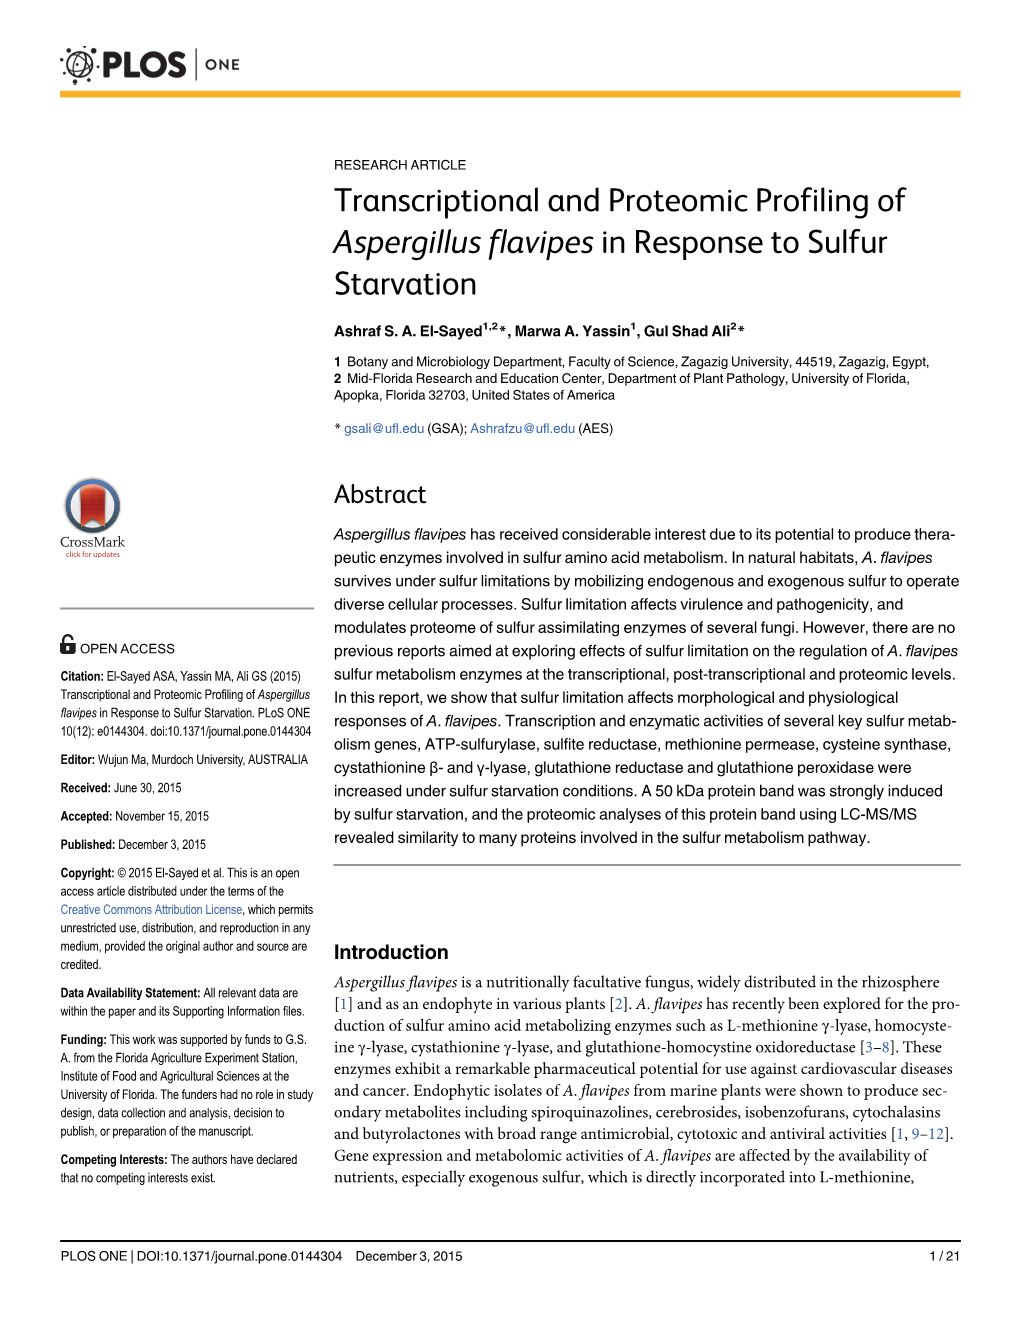 Transcriptional and Proteomic Profiling of Aspergillus Flavipes in Response to Sulfur Starvation